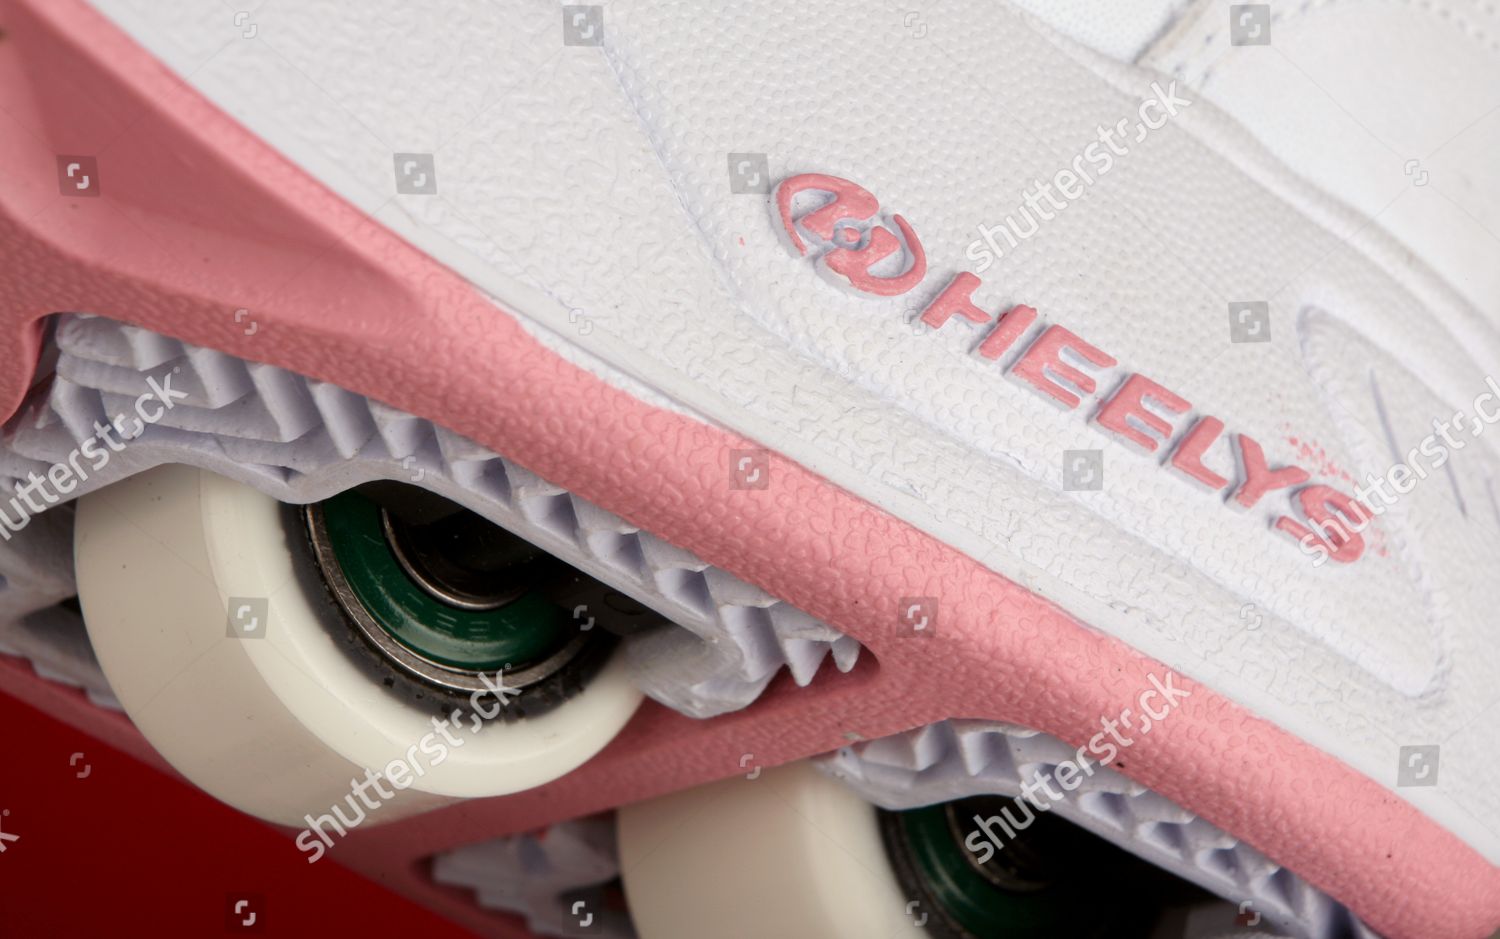 heelys with wheels in front and back